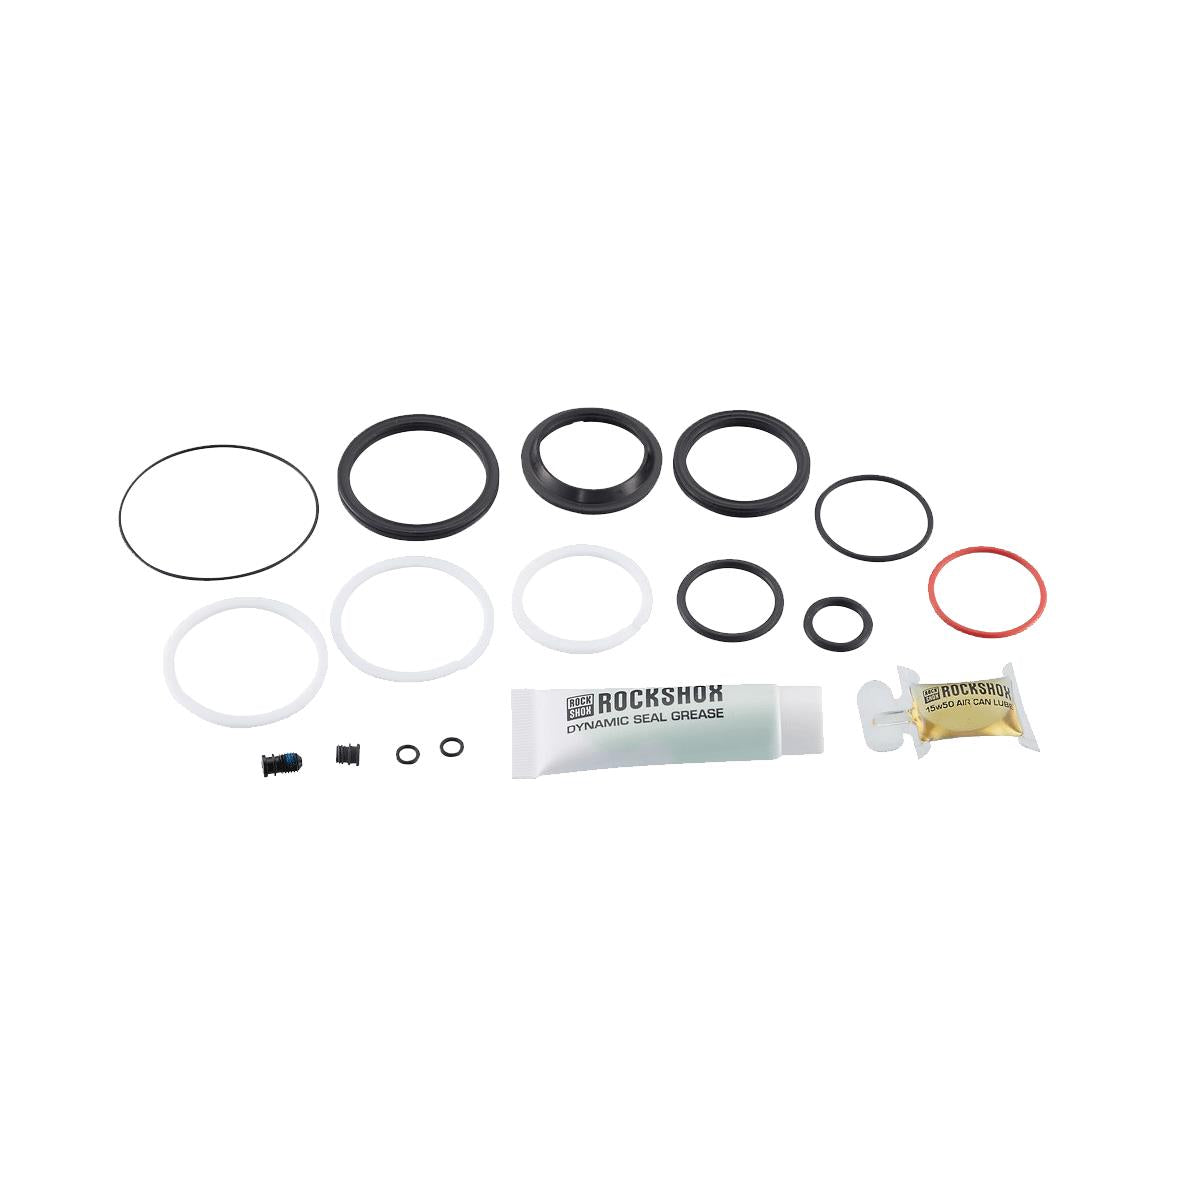 ROCKSHOX SERVICE - 200 HOUR/1 YEAR SERVICE KIT (INCLUDES SEALHEAD SEALS, PISTON SEAL, GLIDE RINGS, IFP SEALS, GREASE) - SUPER DELUXE COIL (2018+)